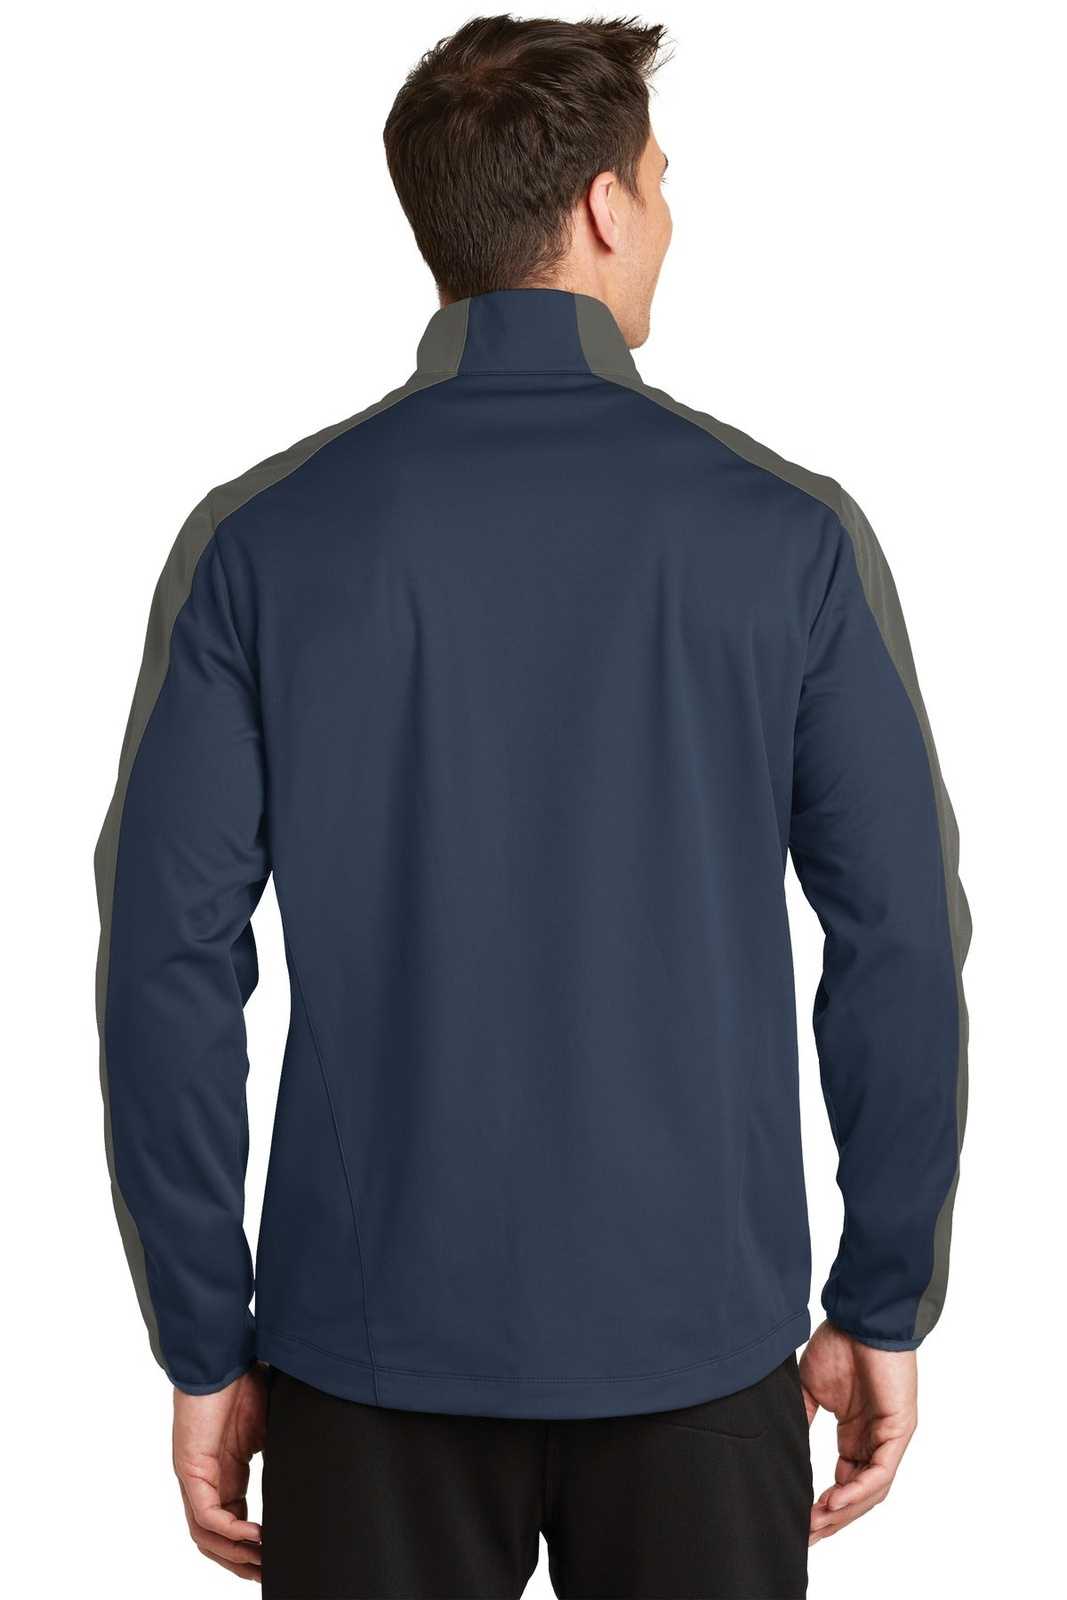 Port Authority J718 Active Colorblock Soft Shell Jacket - Dress Blue Navy Gray Steel - HIT a Double - 2